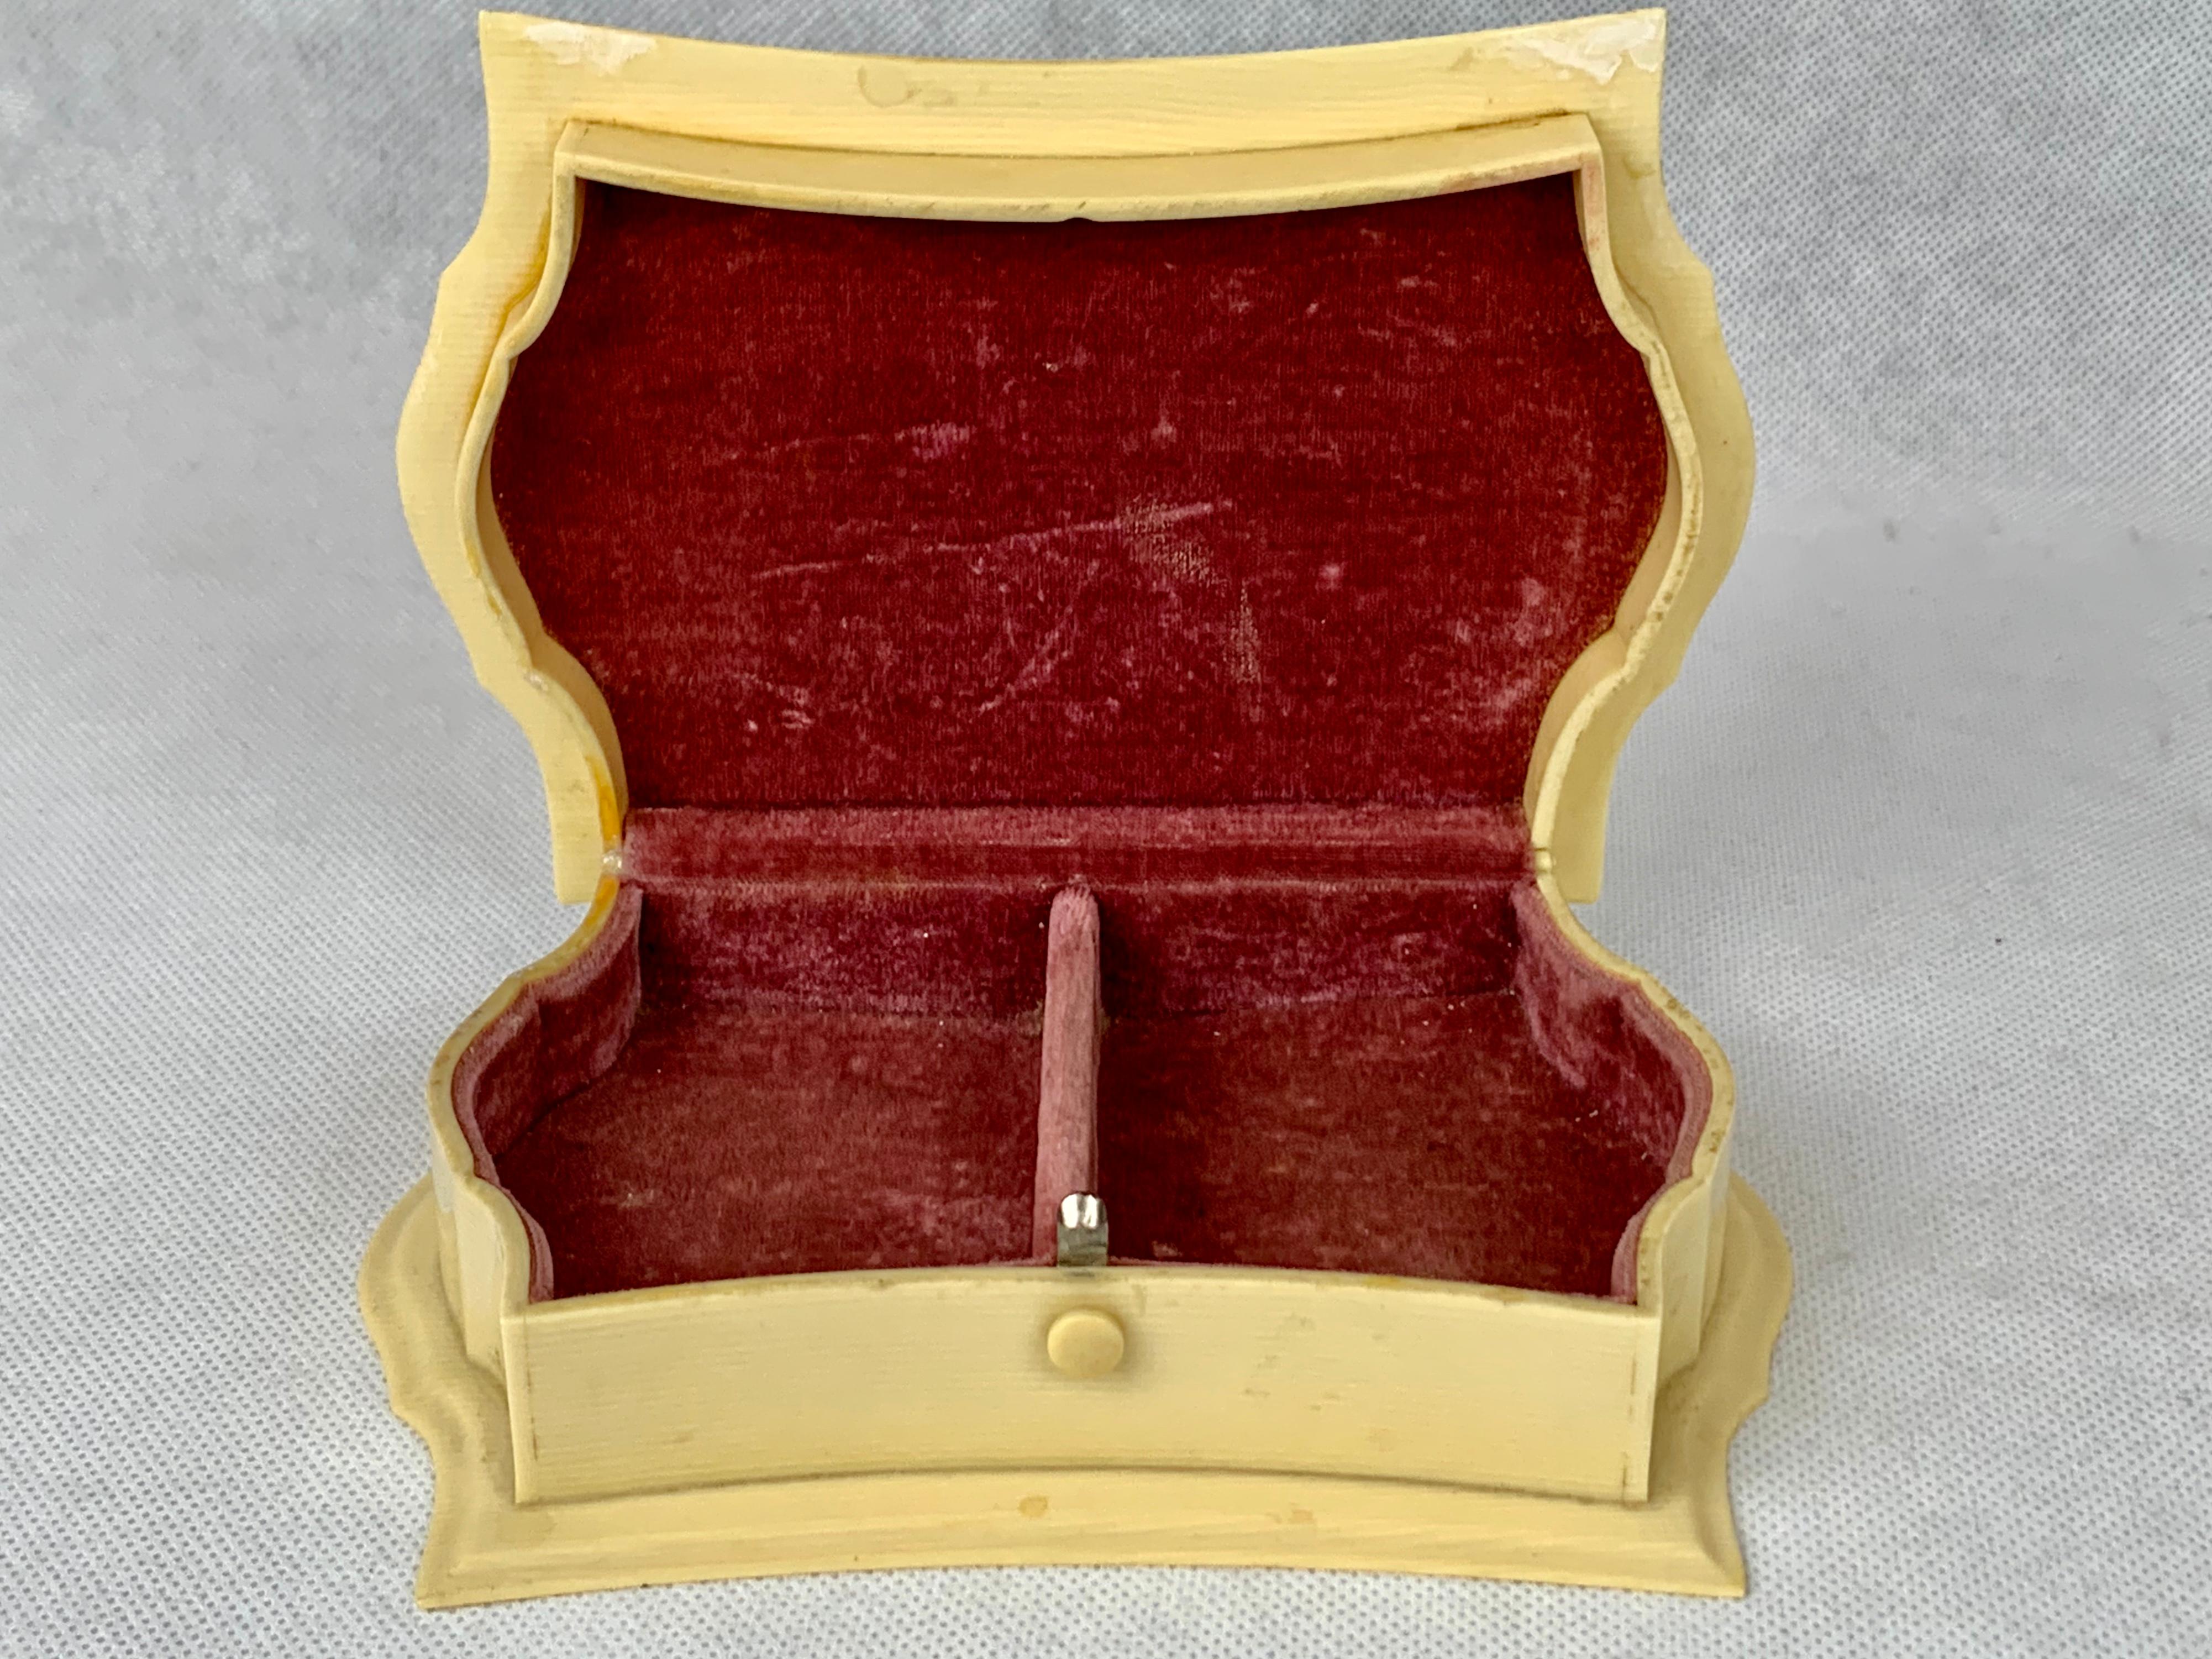 Celluloid made its appearance in the mid-19th century. One of its most popular forms was to imitate ivory including the grain lines. This jewelry box is marked 